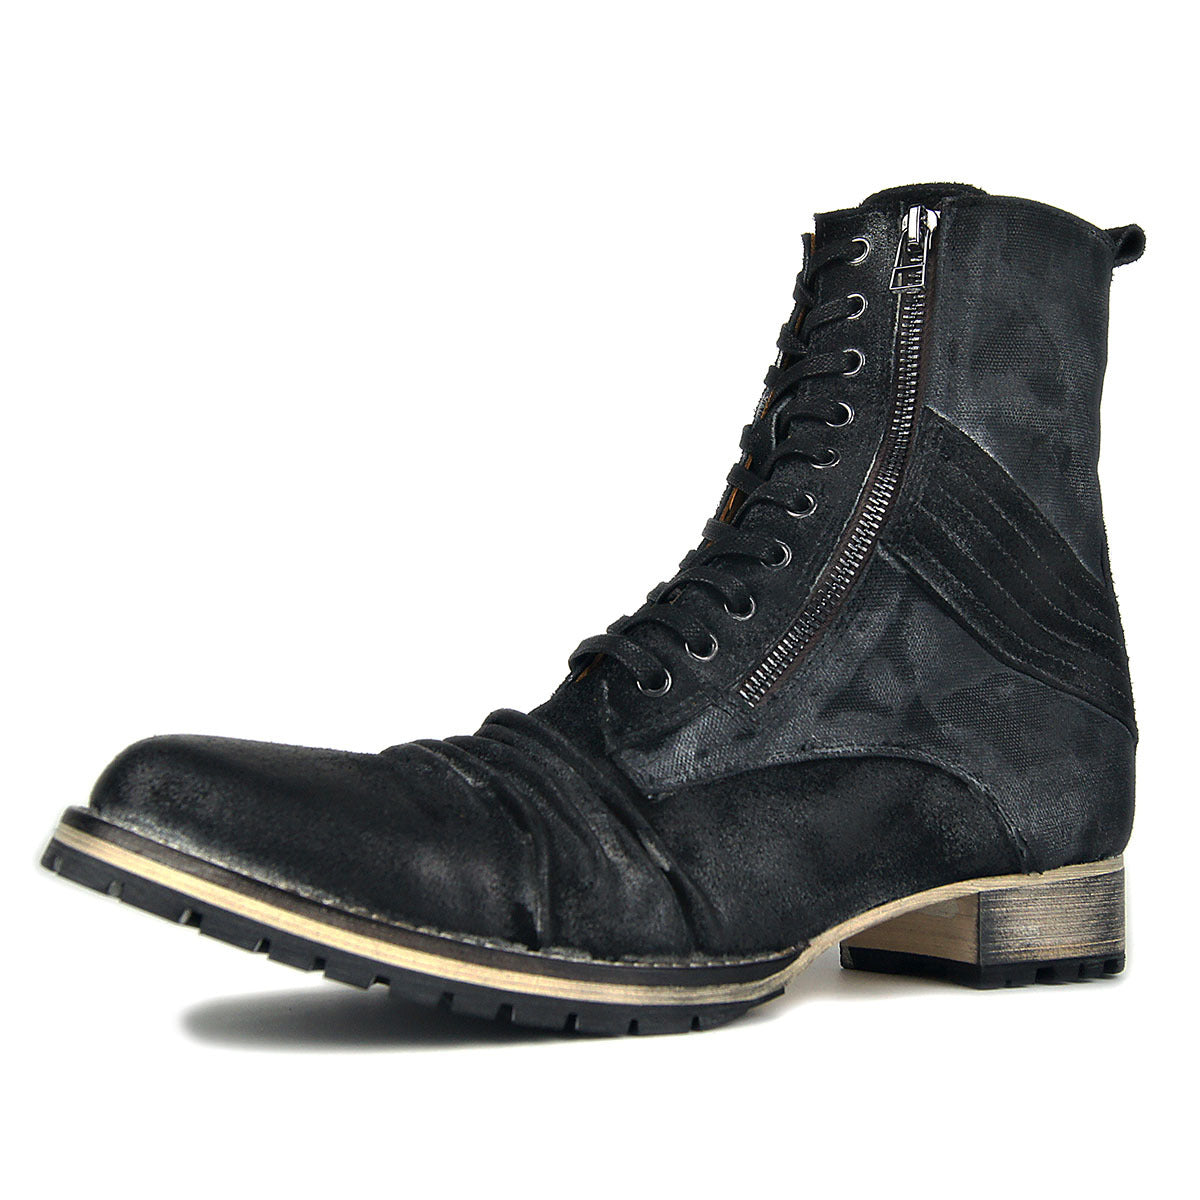 Mens Handmade Motorcycle Ankle Zipper Boots